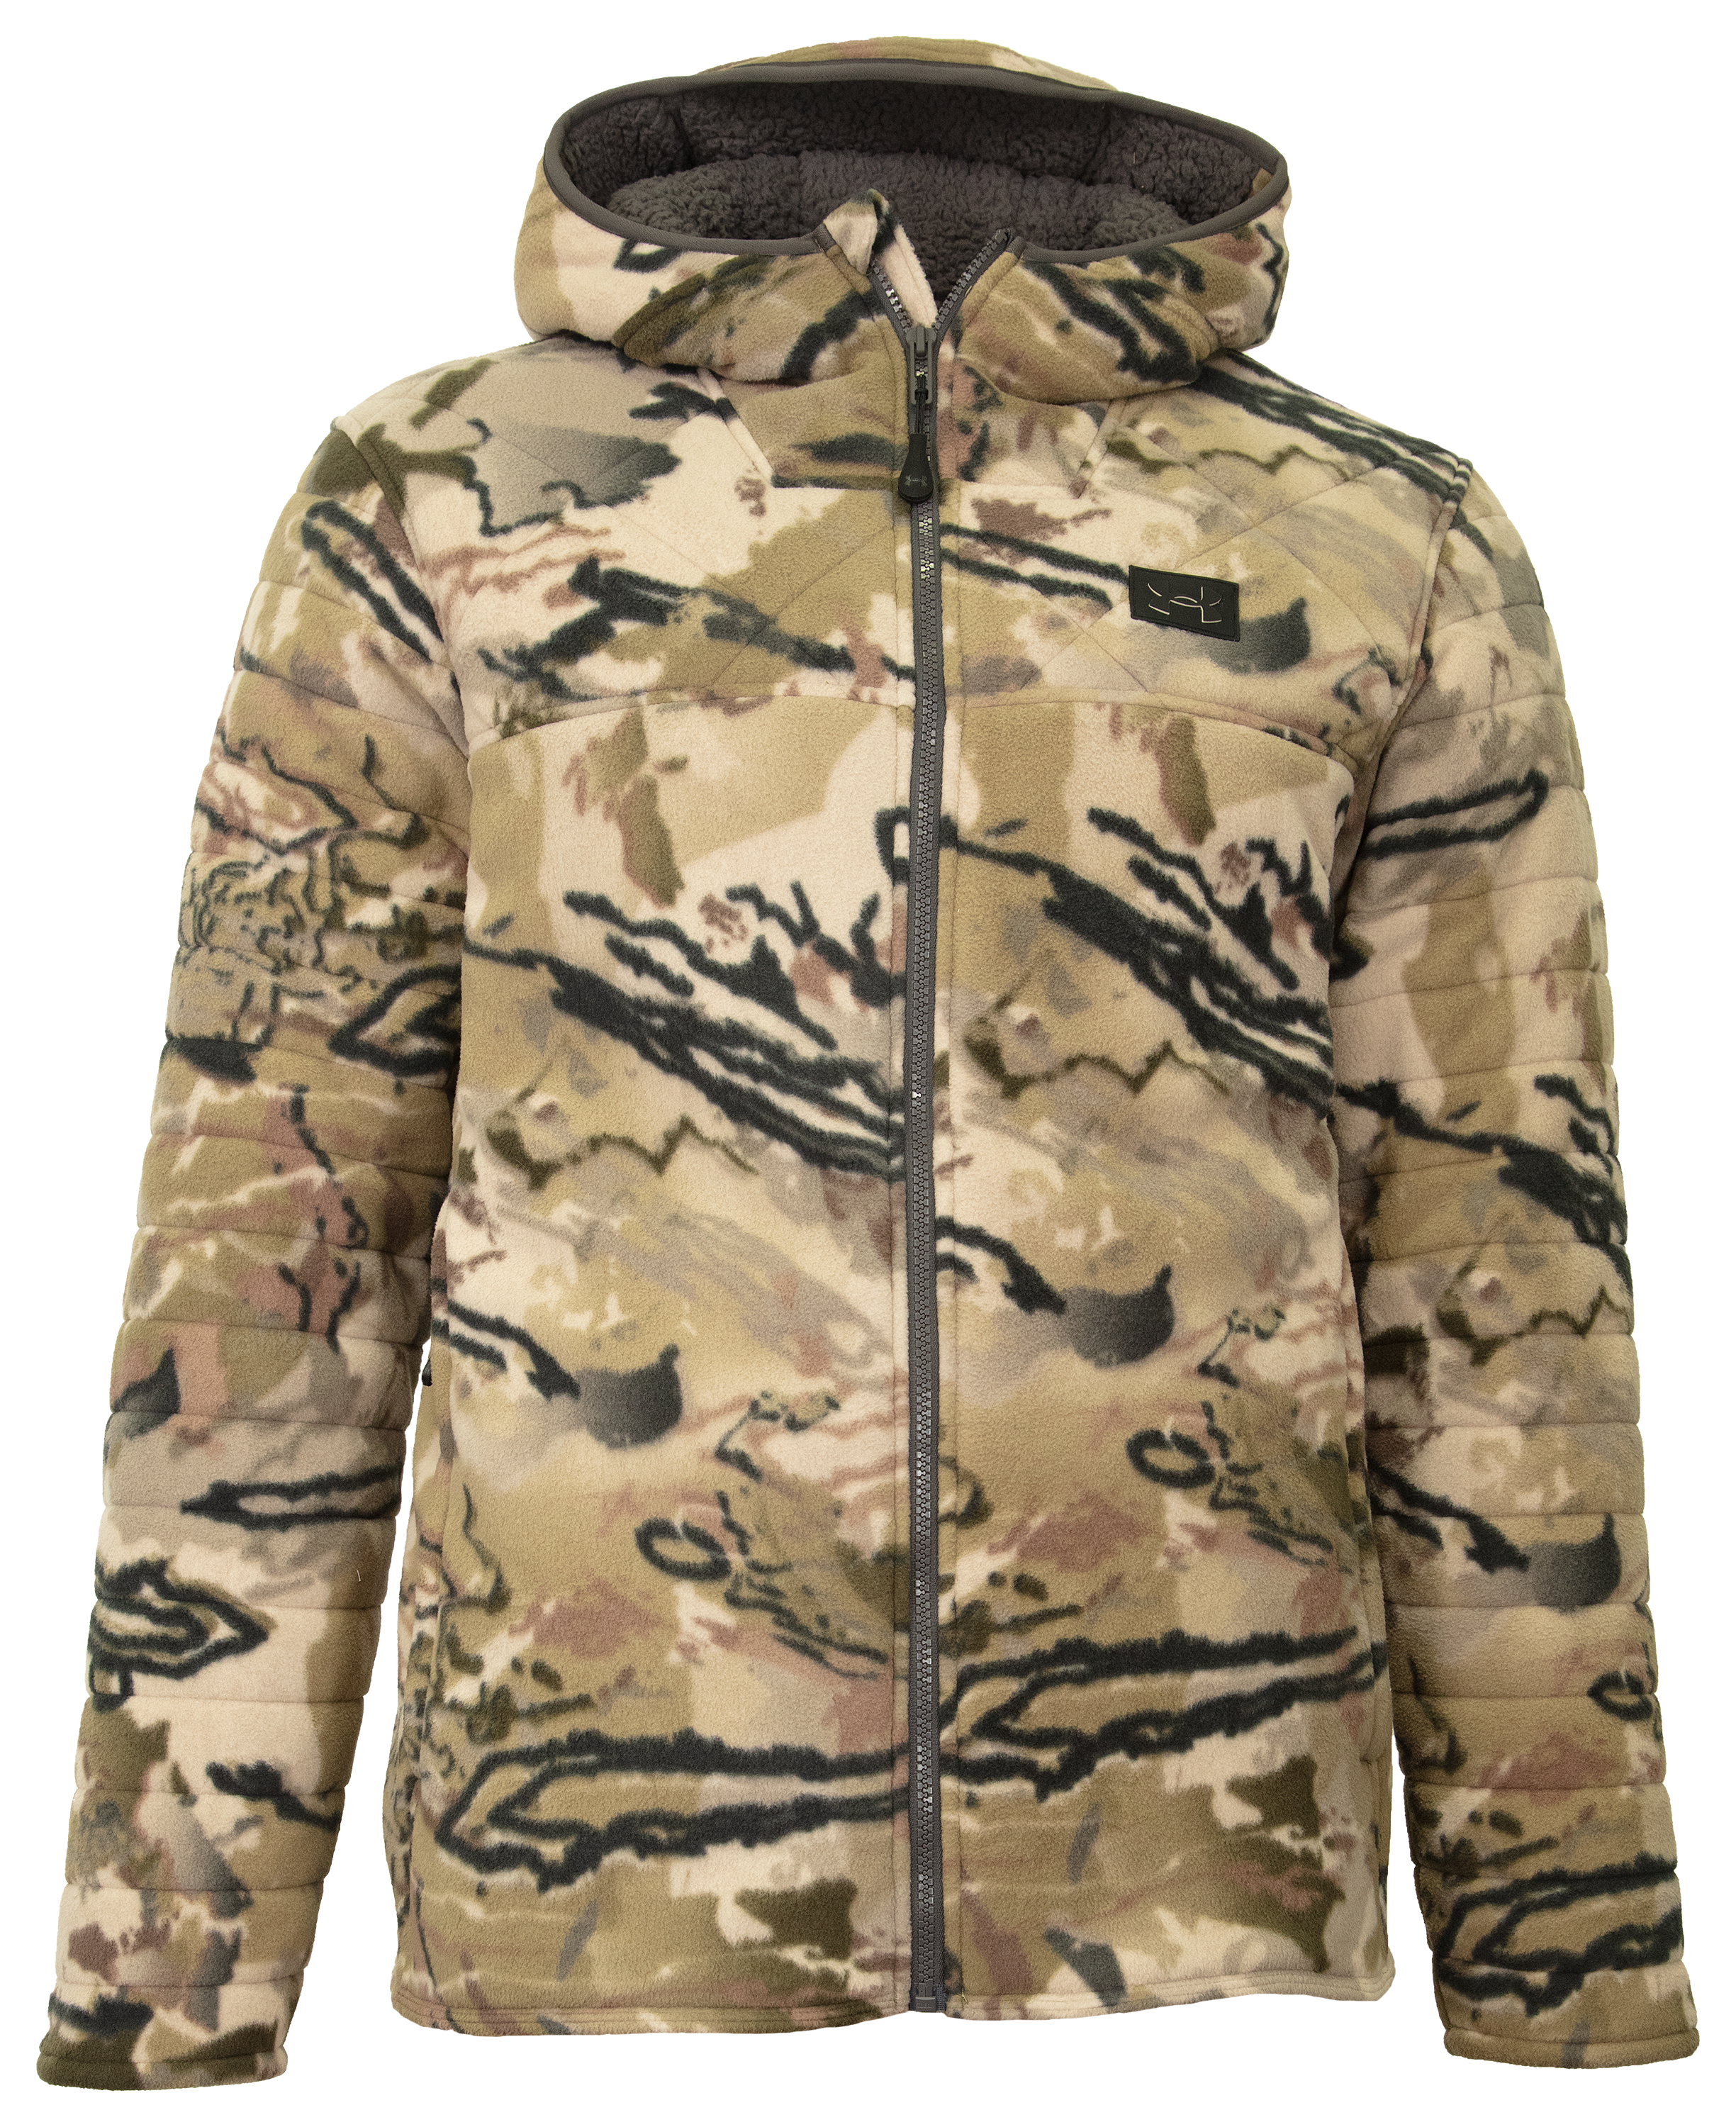 Under Armour Cold Gear Realtree Hunting Jacket XL